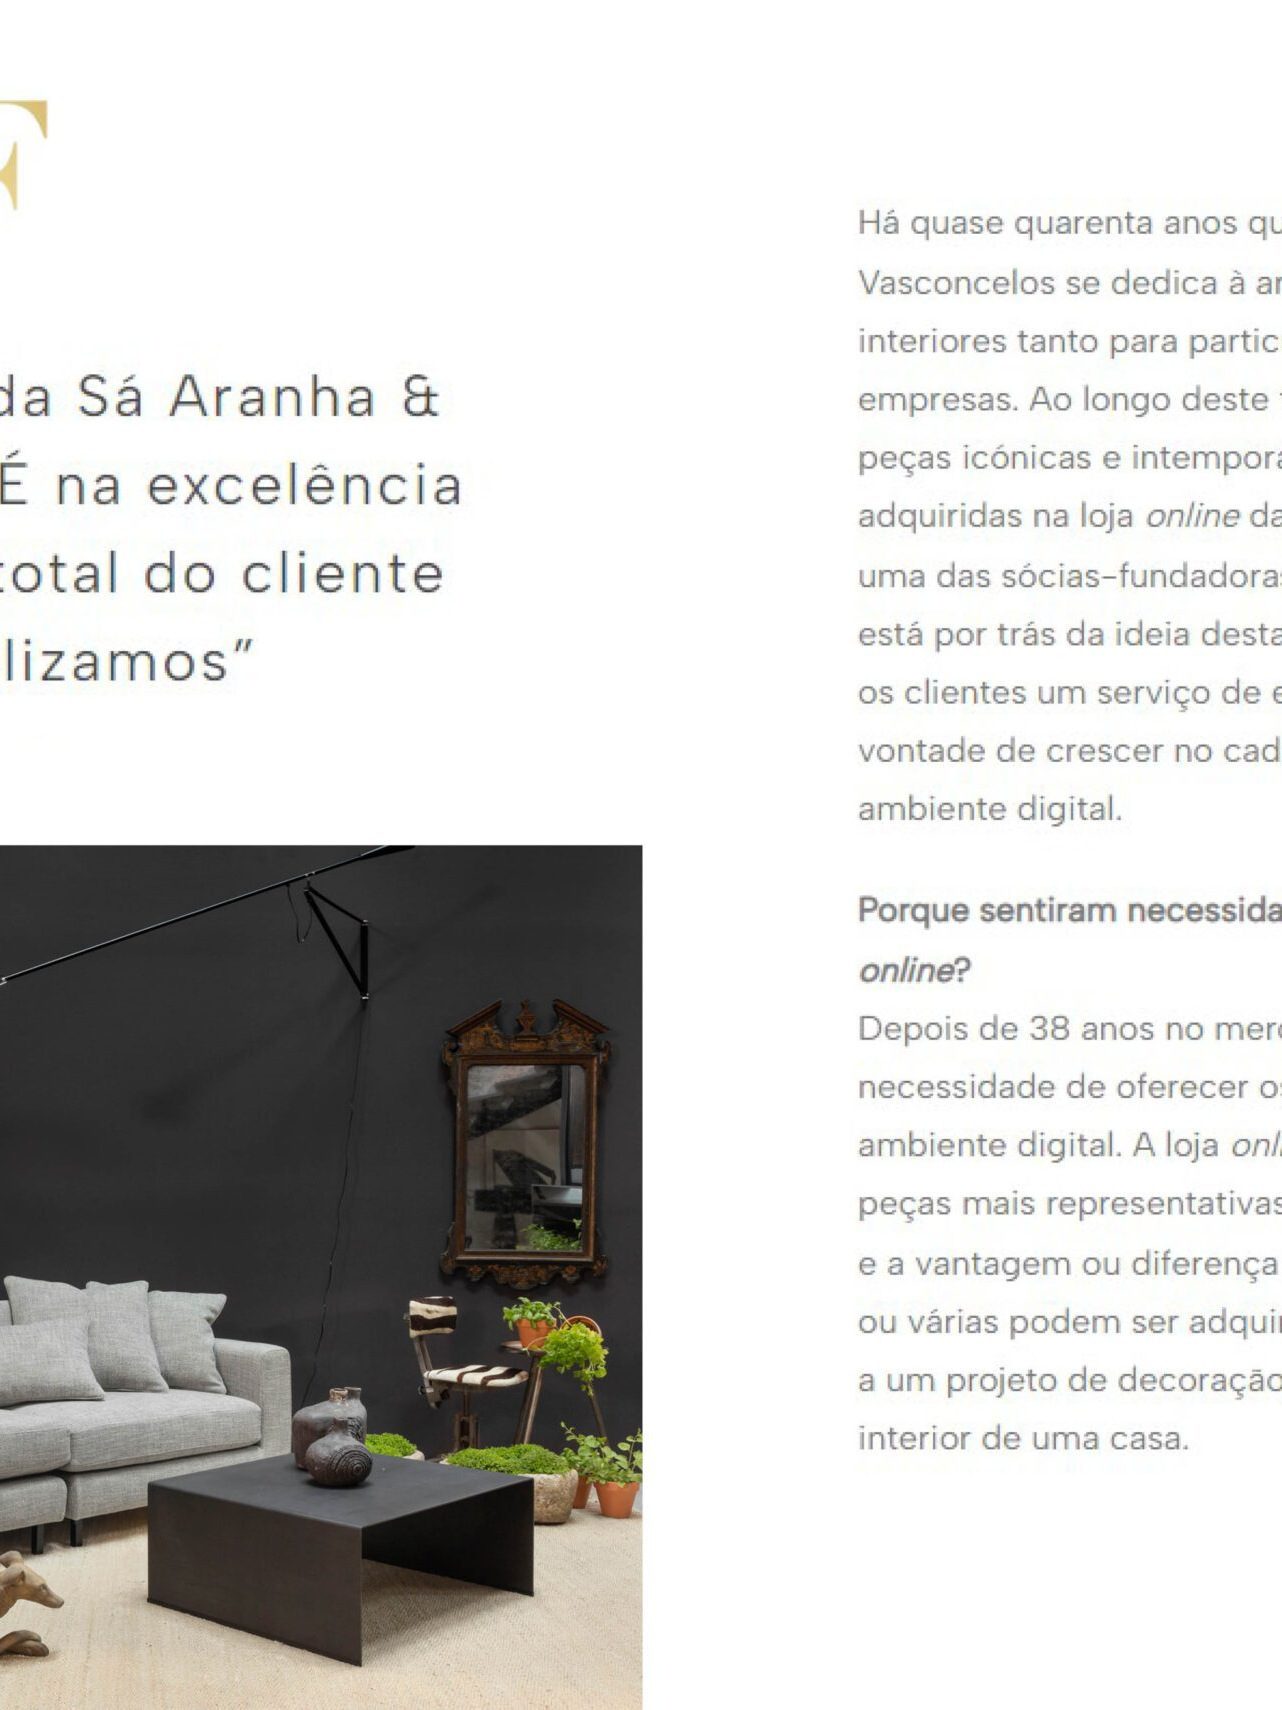 SAV luxury review design architecture project luxury interview showroom decor harmony detail pieces wood creative light living room color project yellow online shop partners rosário tello carmo aranha furniture